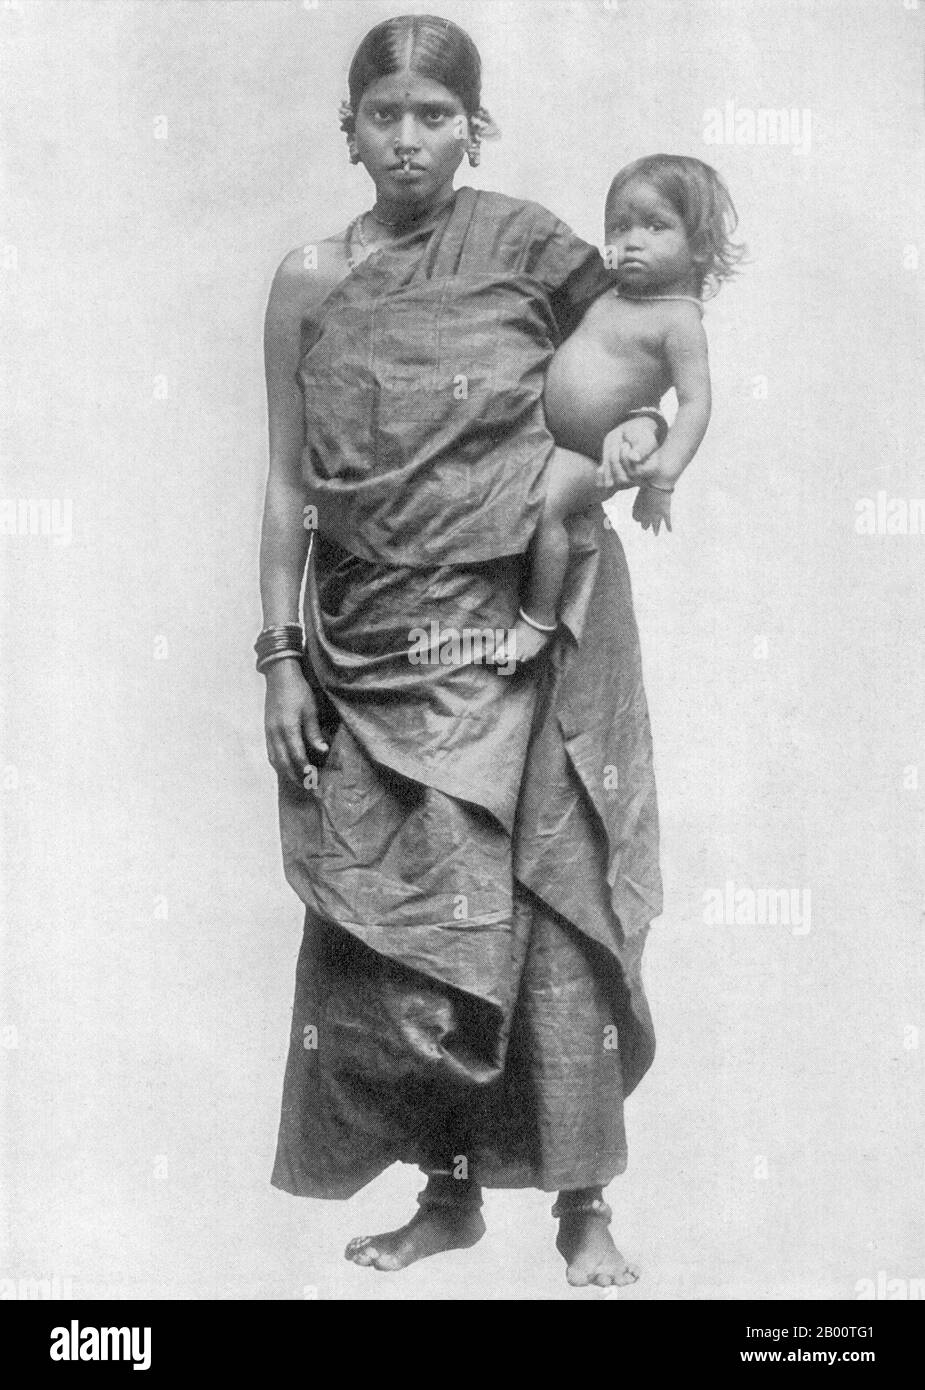 Sri Lanka: Sinhalese mother and child, late 19th century.  Sri Lanka had always been an important port and trading post in the ancient world, and was increasingly frequented by merchant ships from the Middle East, Persia, Burma, Thailand, Malaysia, Indonesia and other parts of Southeast Asia. The islands were known to the first European explorers of South Asia and settled by many groups of Arab and Malay merchants. Stock Photo